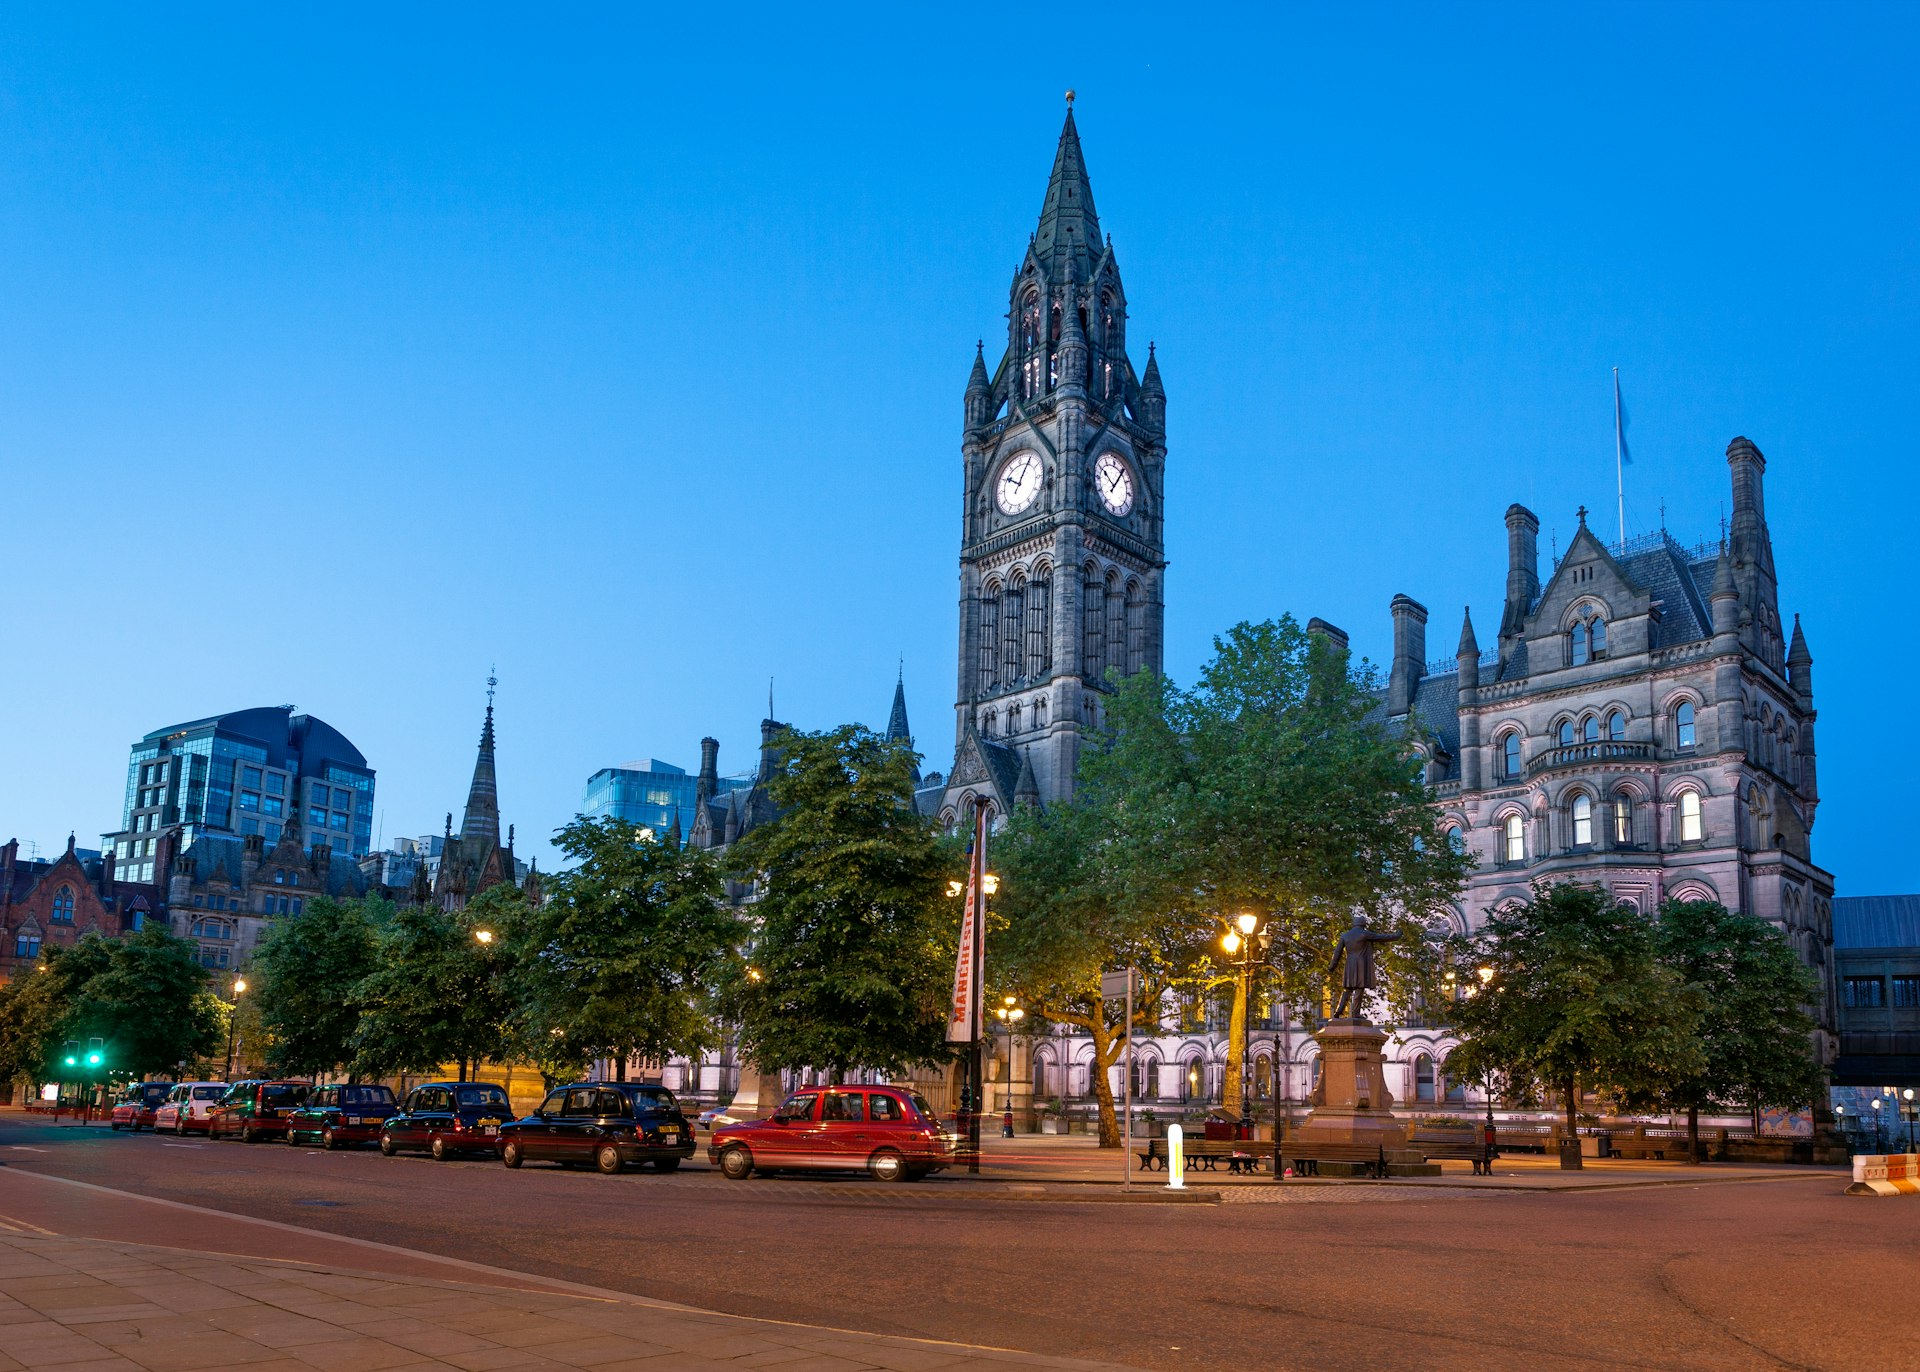 Manchester Town Hall is a Victorian, neo-gothic municipal building in Manchester